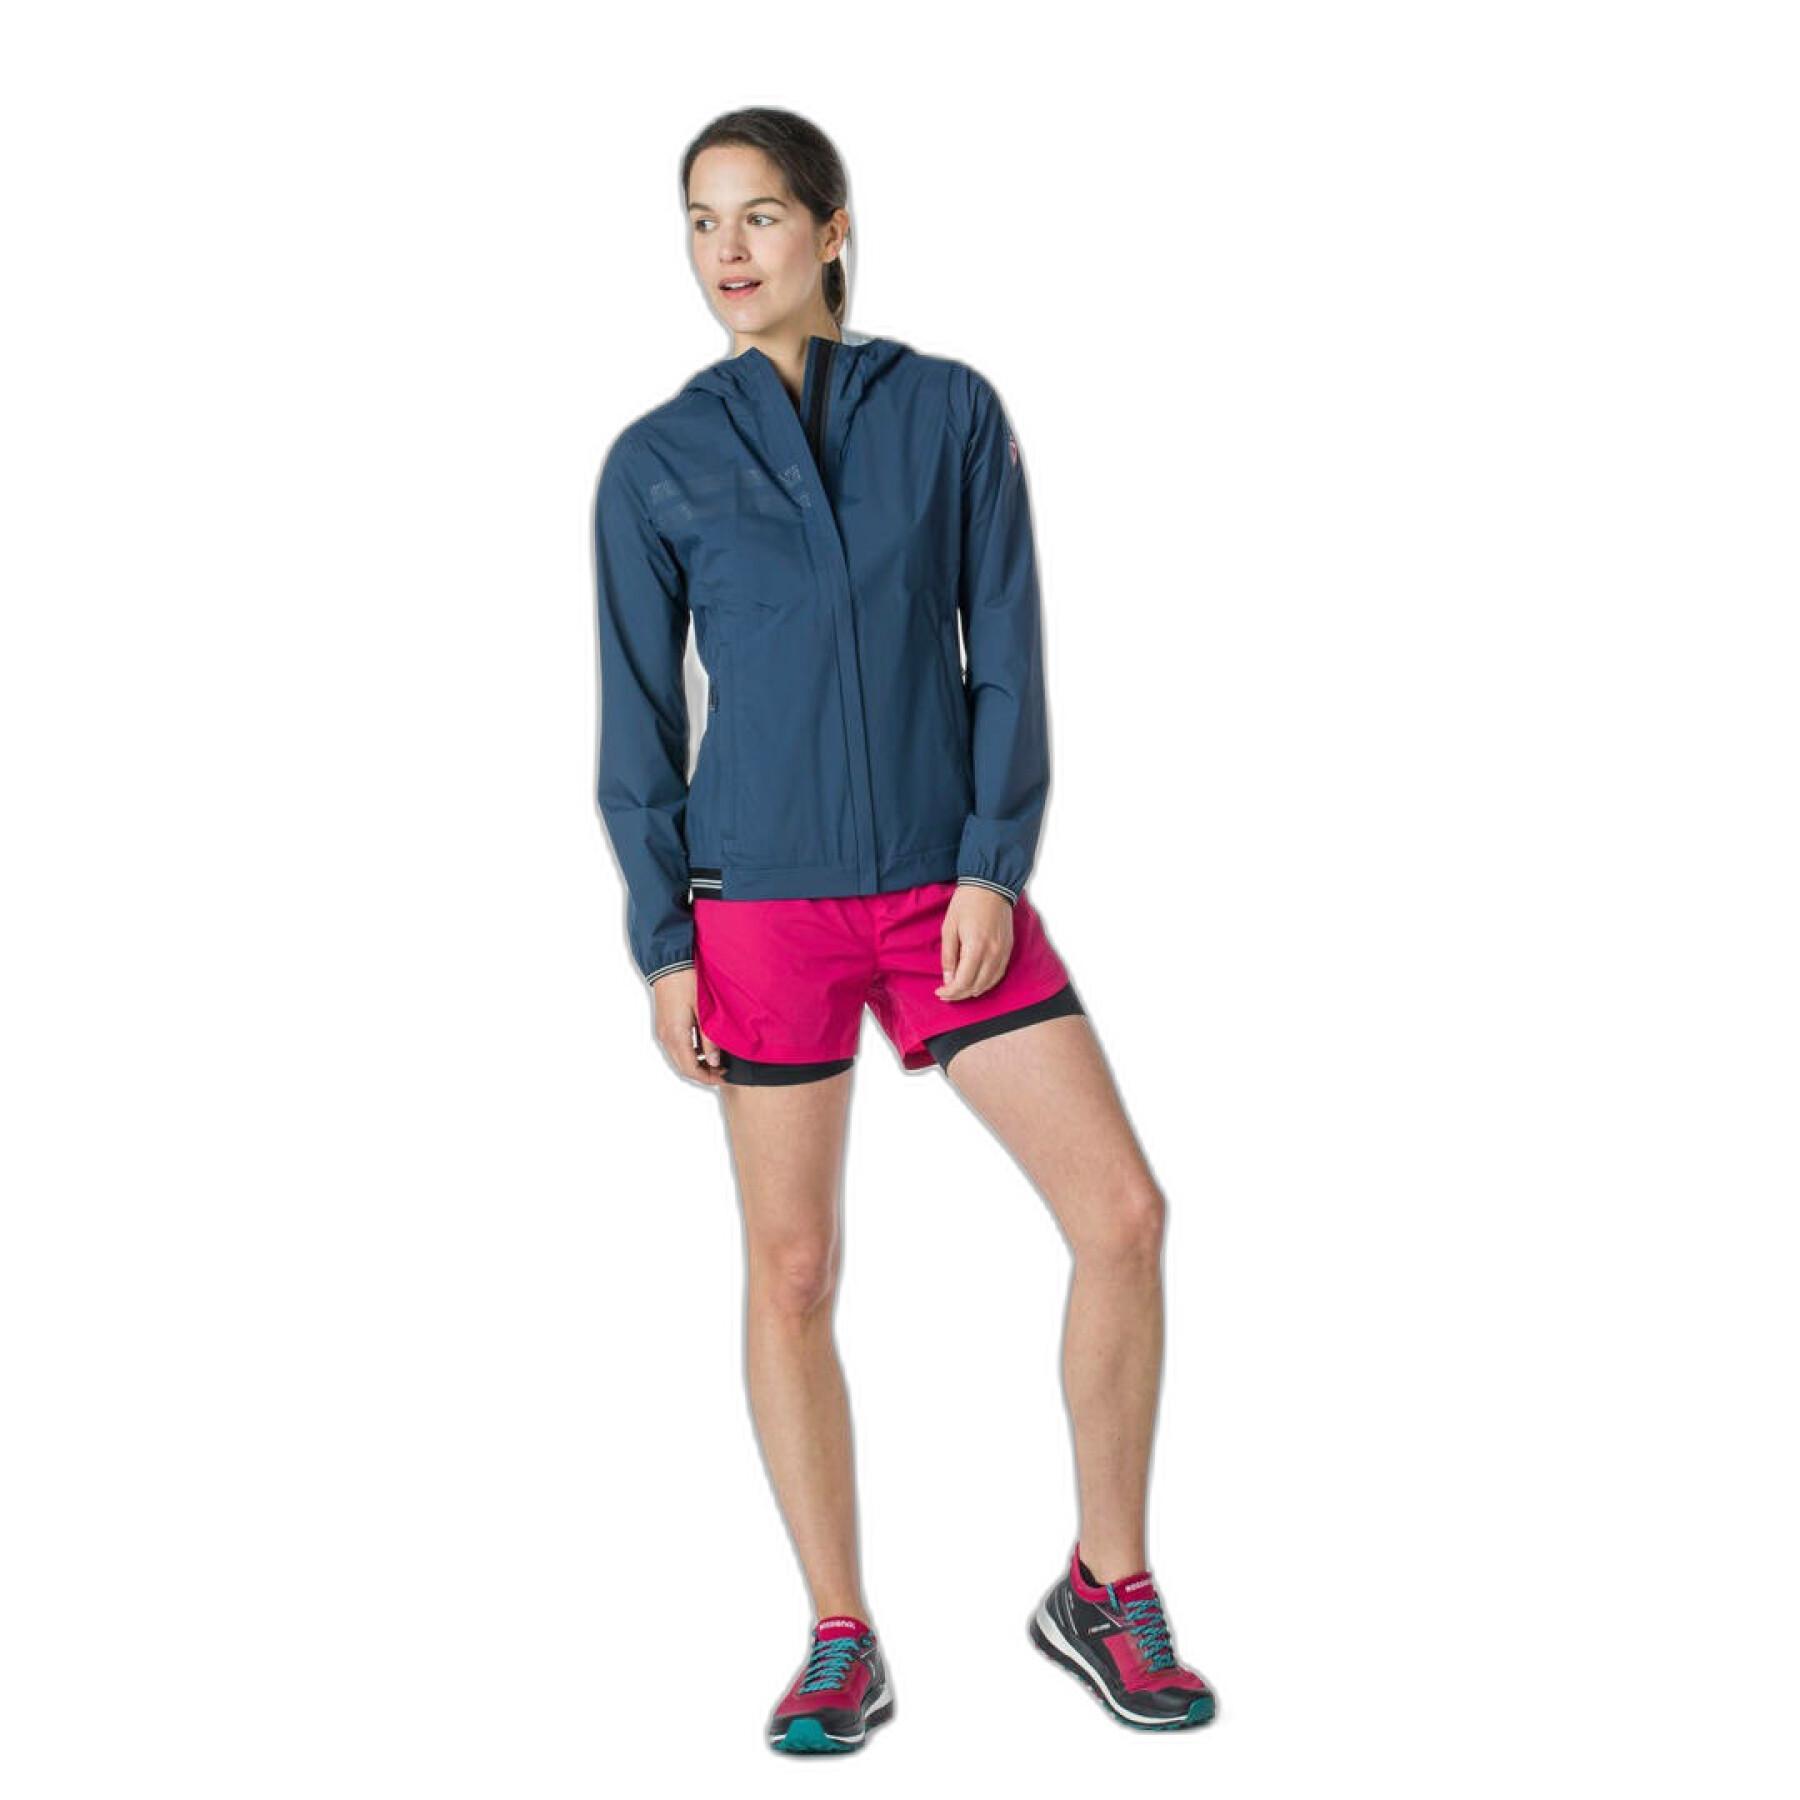 Chaqueta impermeable para mujer Rossignol SKPR